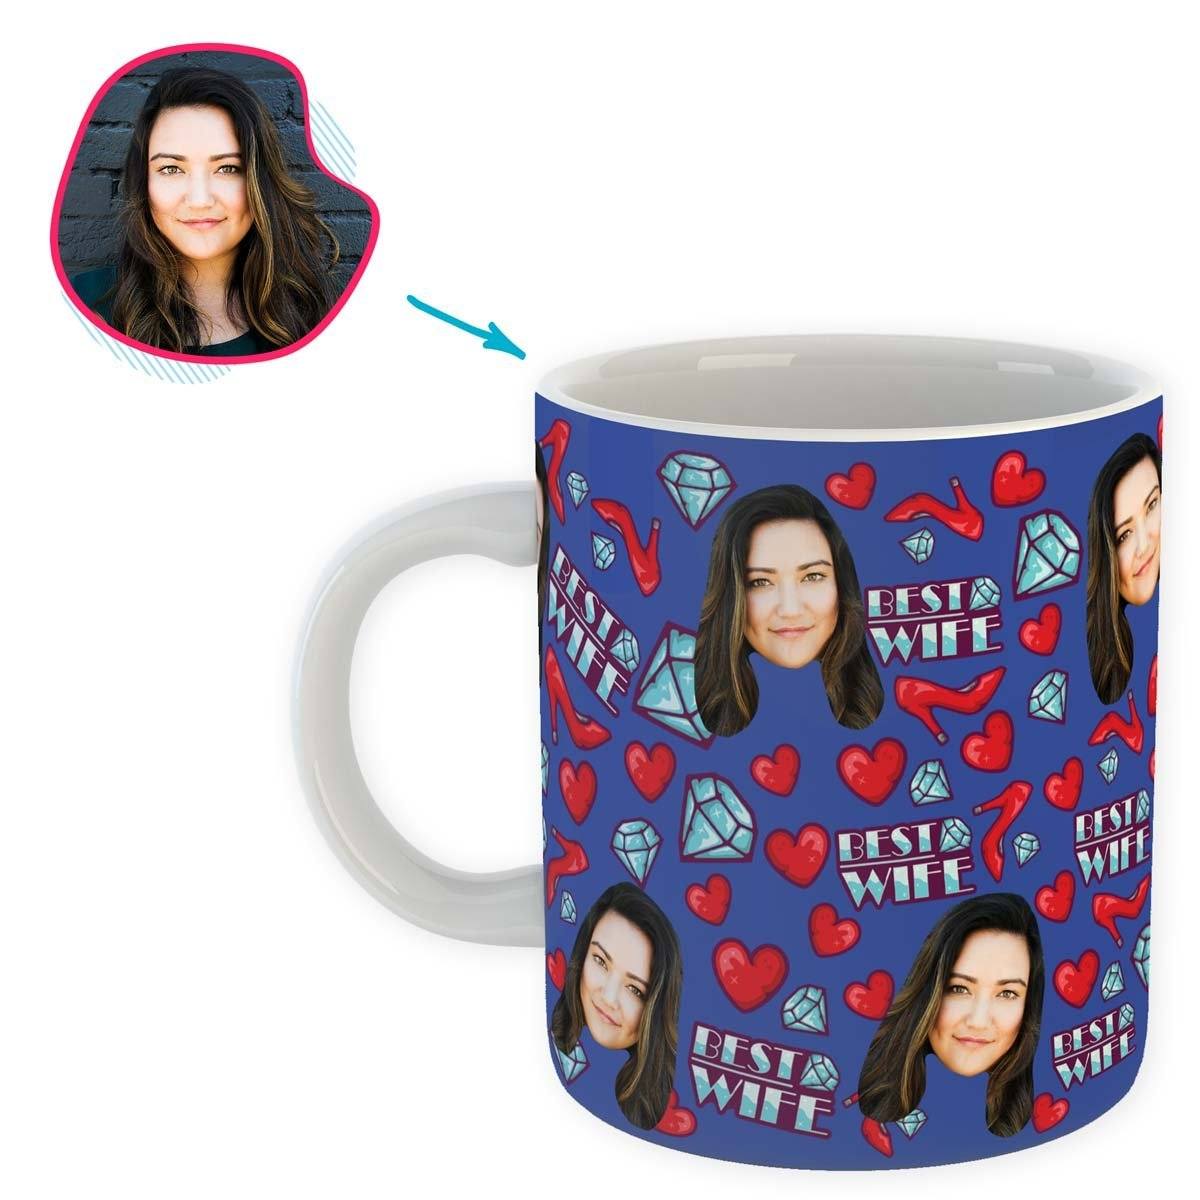 Darkblue Wife personalized mug with photo of face printed on it